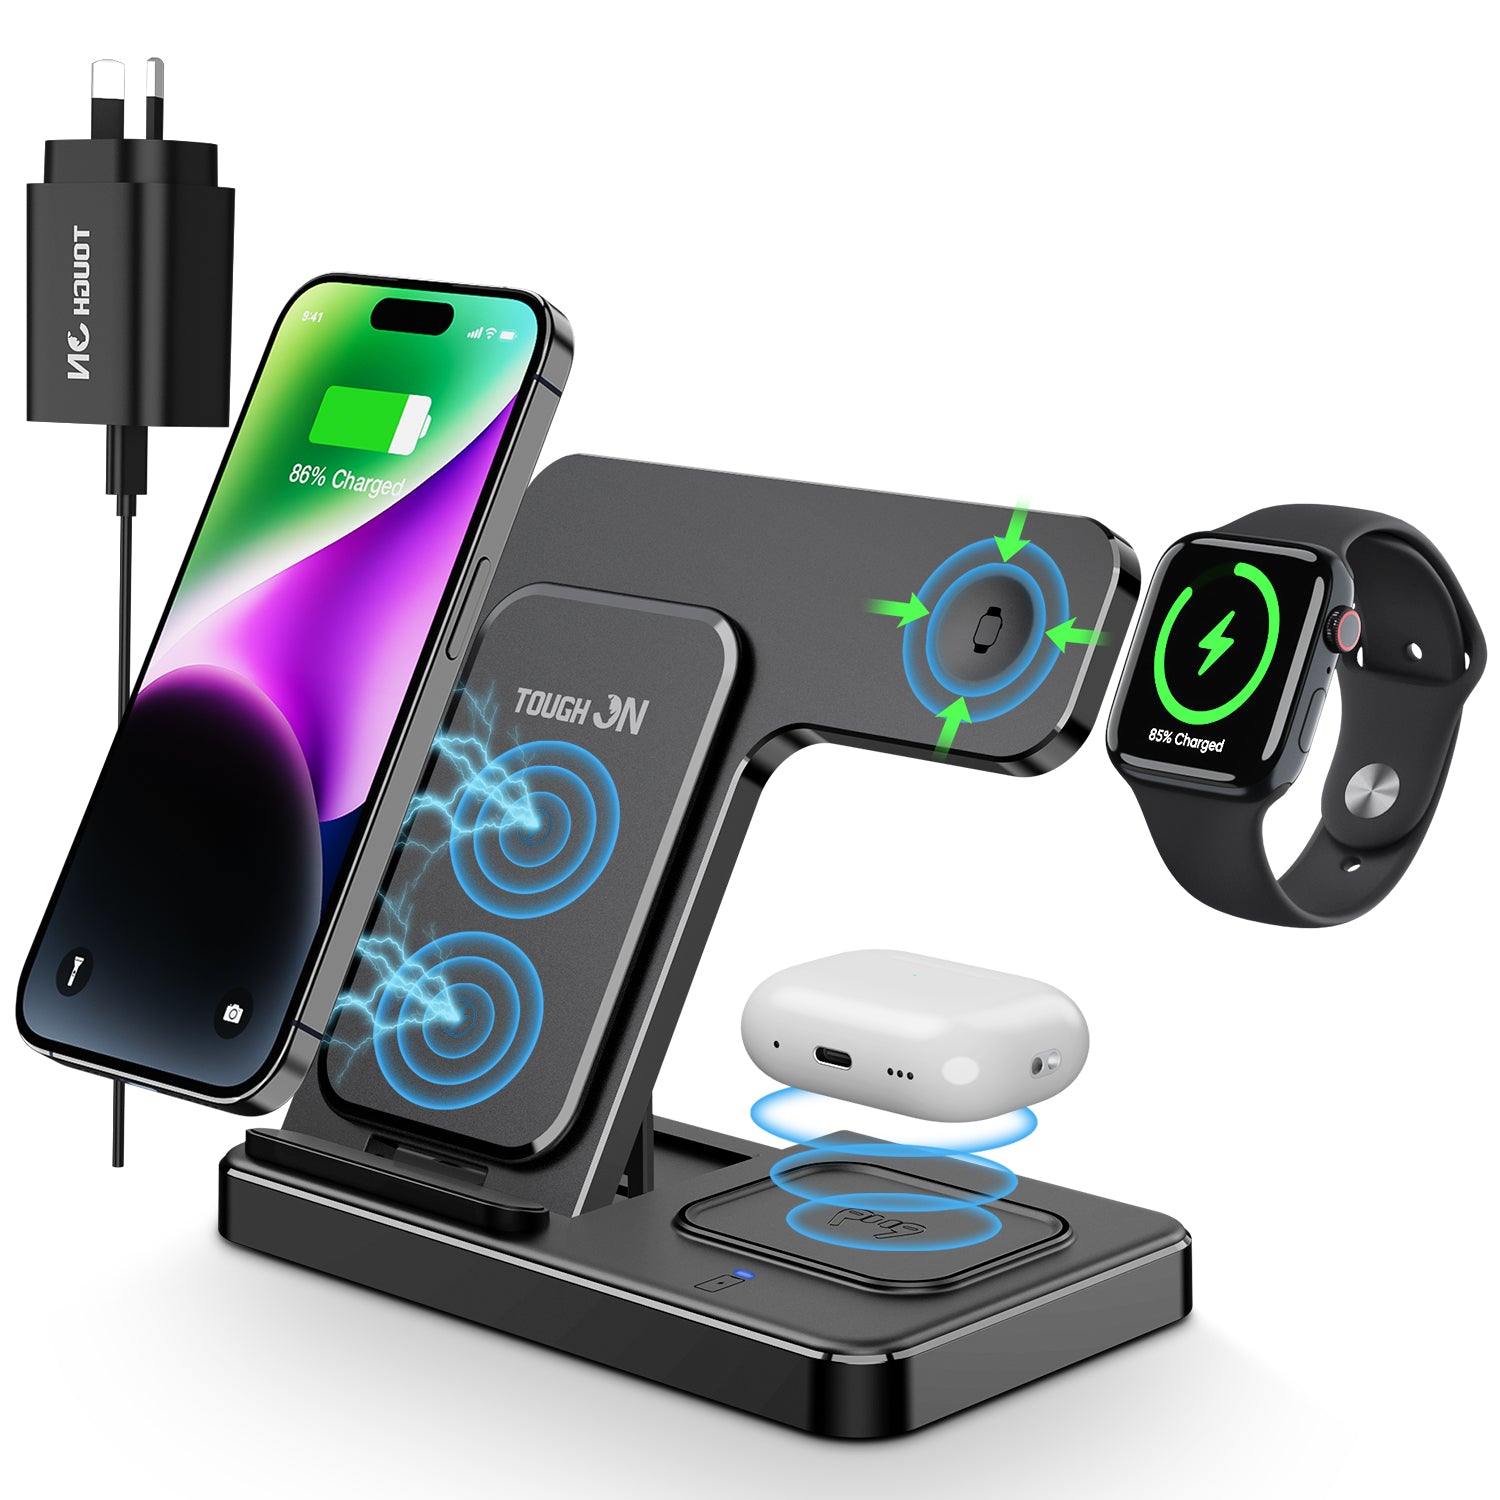 Tough On Wireless Charger 3 in 1 Foldable Wireless Charging